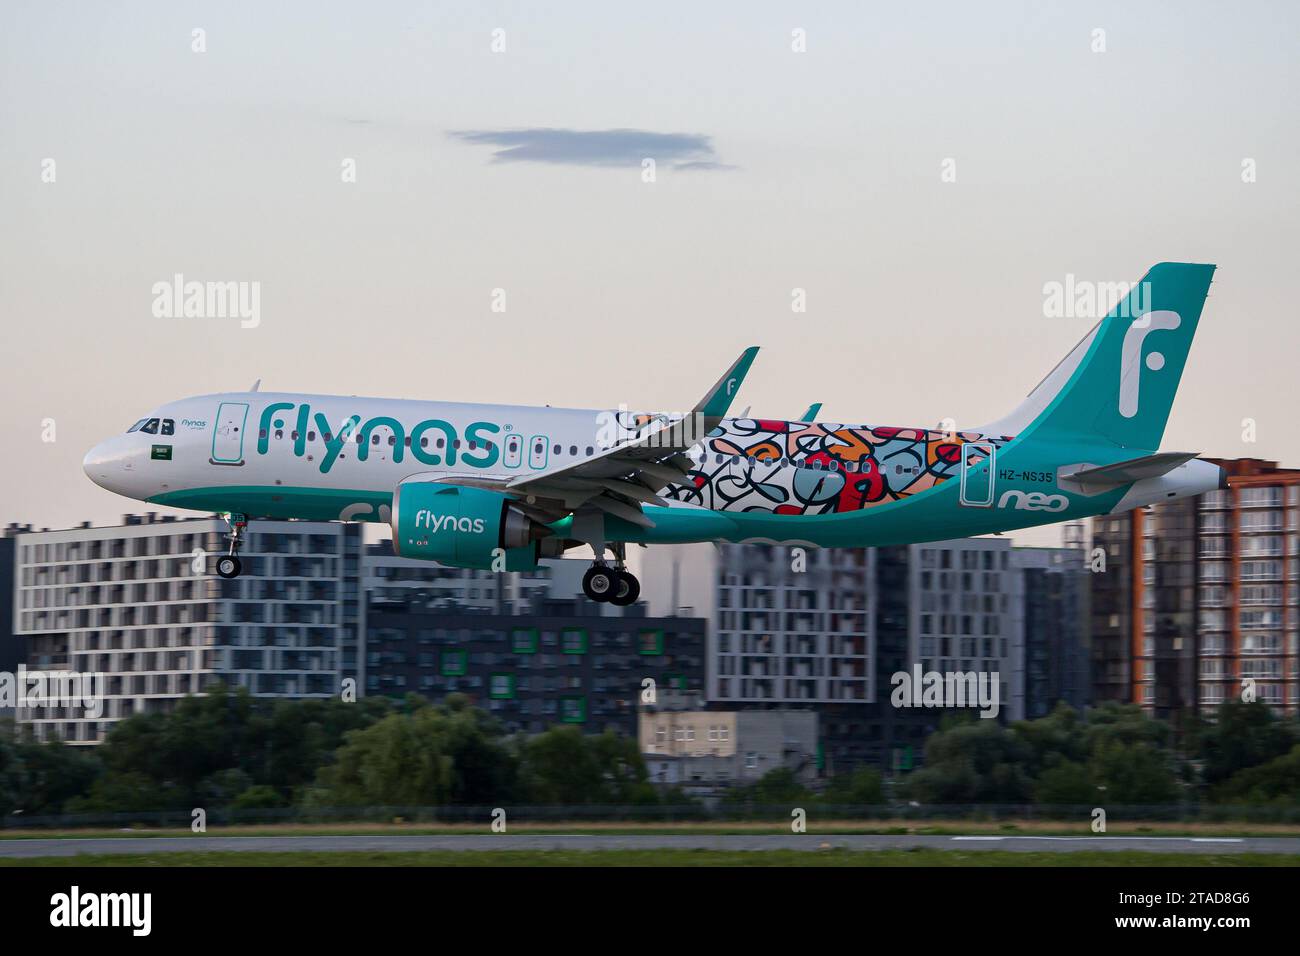 Saudi airline's Flynas Airbus A320 NEO in a 'Year of Arabic Calligraphy' livery landing at Lviv Airport after a flight from Riyadh Stock Photo